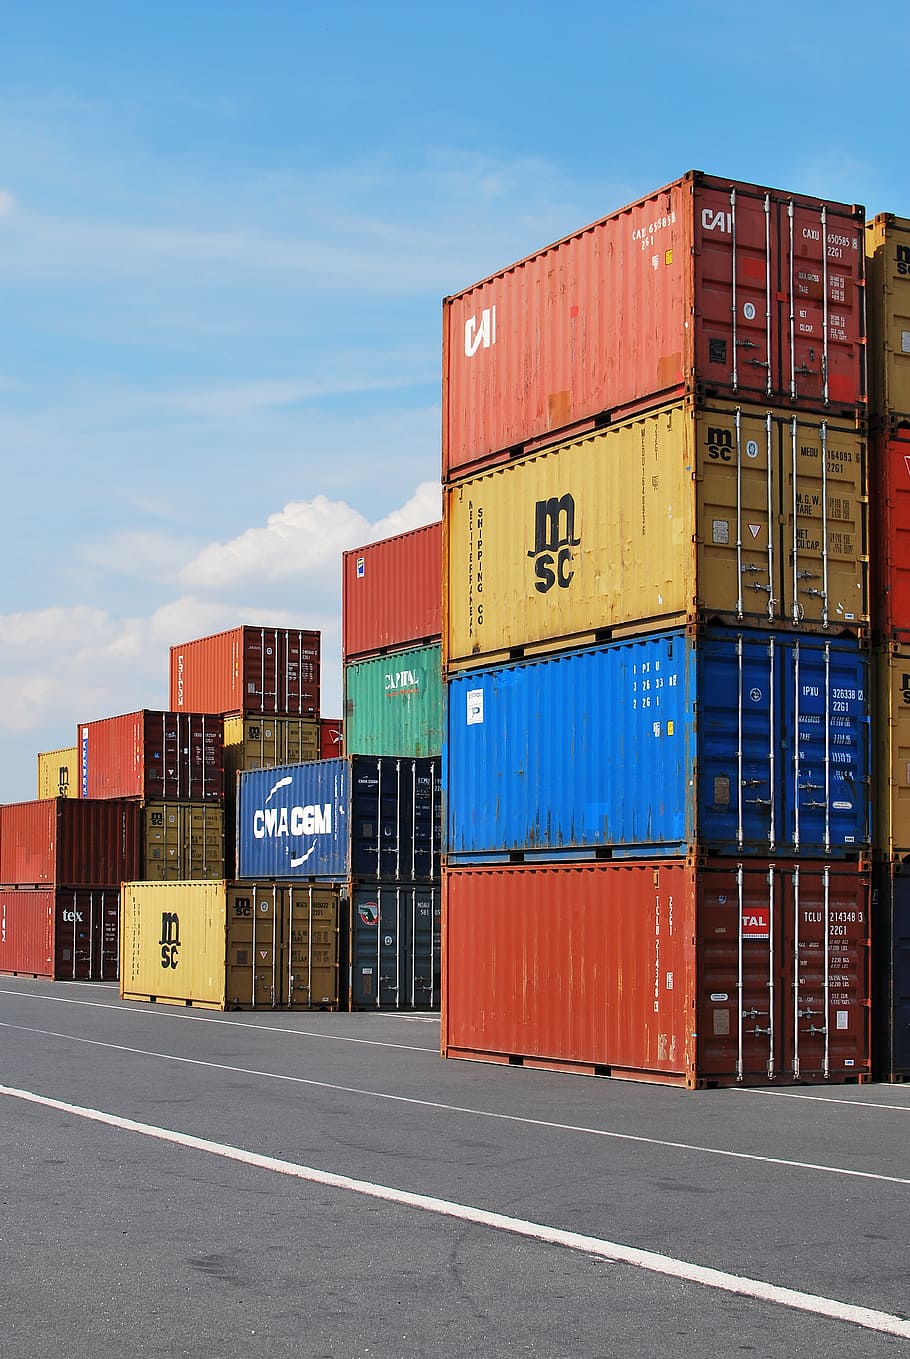 stack intermodal containers, dock, container, export, cargo, port, freight, shipping, harbor, commercial